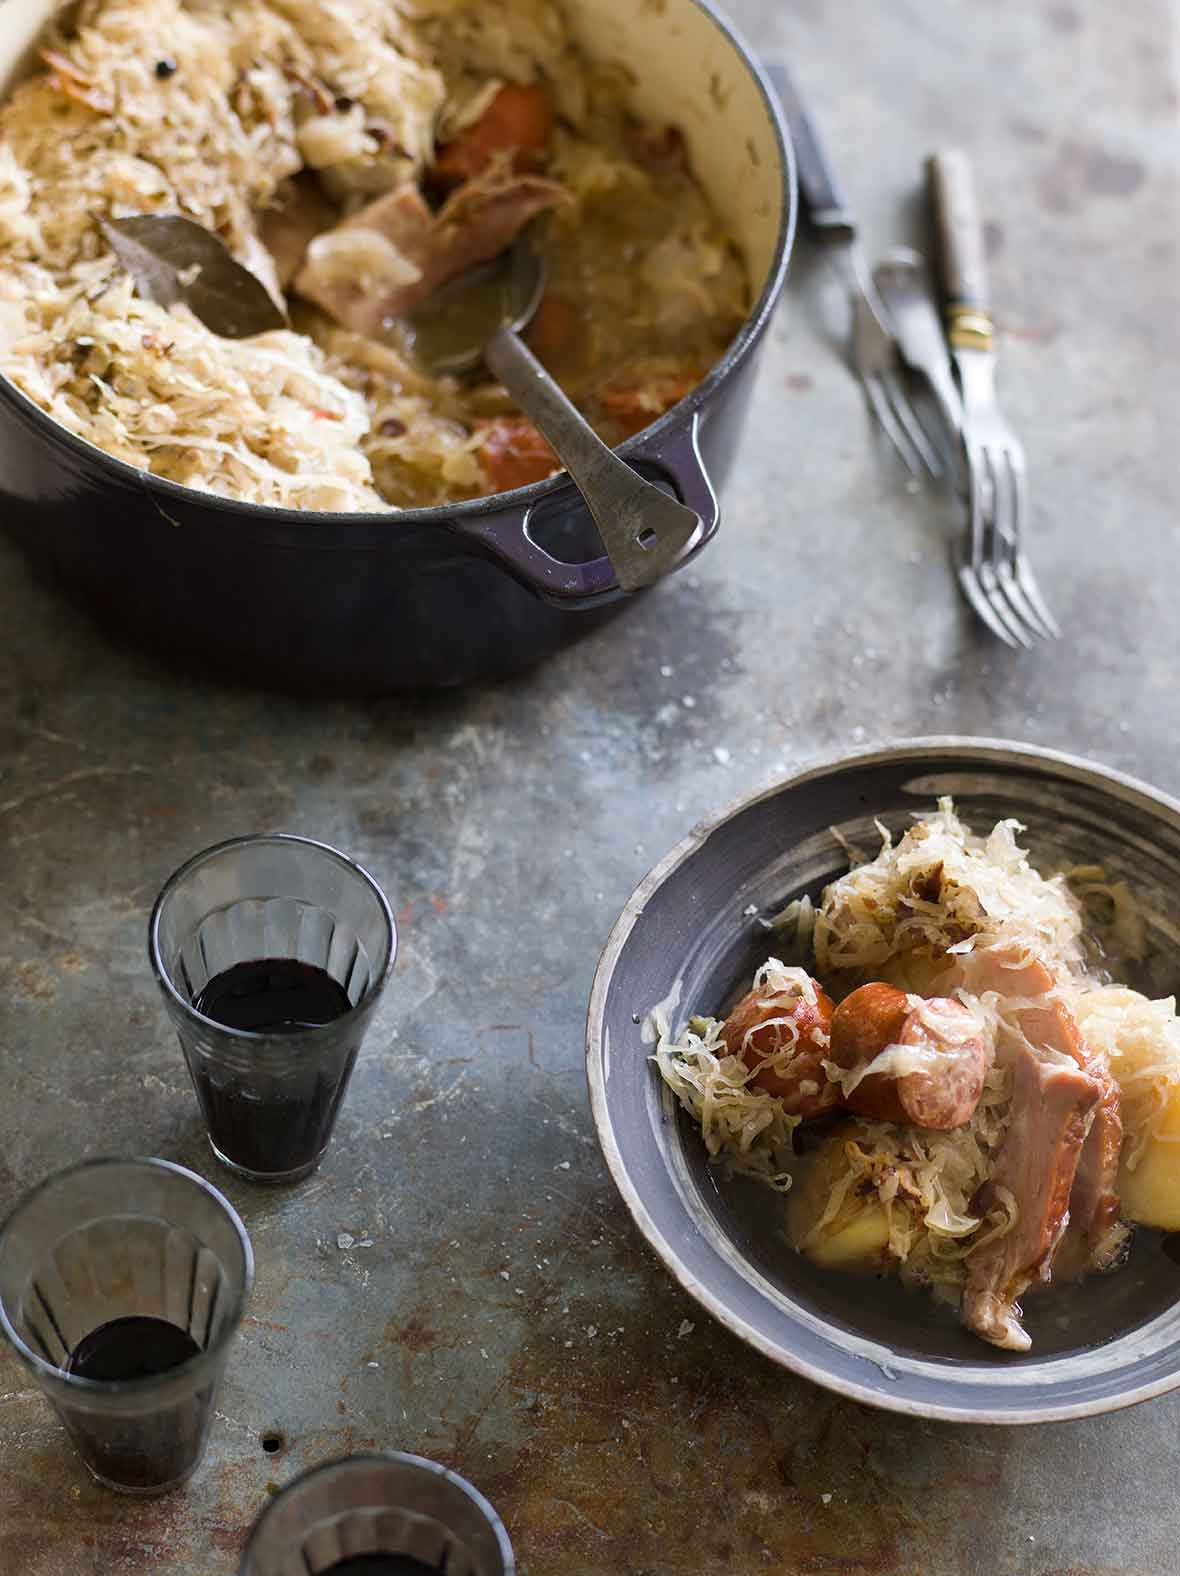 A Dutch oven and a porcelain bowl filled with choucroute garnie, made with pork, sausage, and sauerkraut, with two glasses of wine on the side.